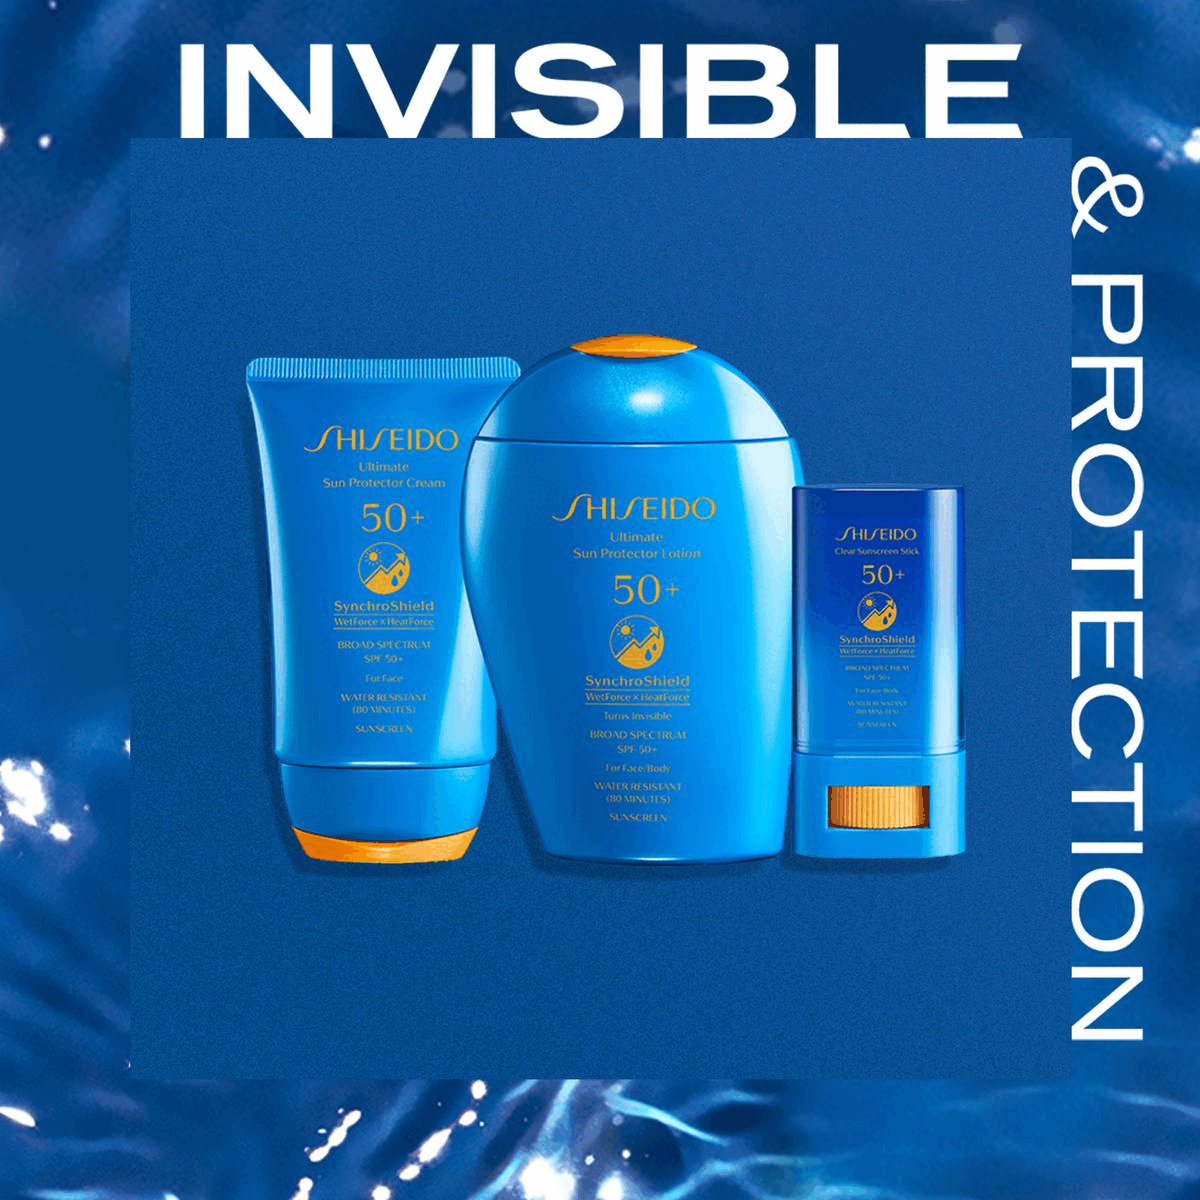 Image 1, invisible protection. Image 2, powerful protection, peak performance